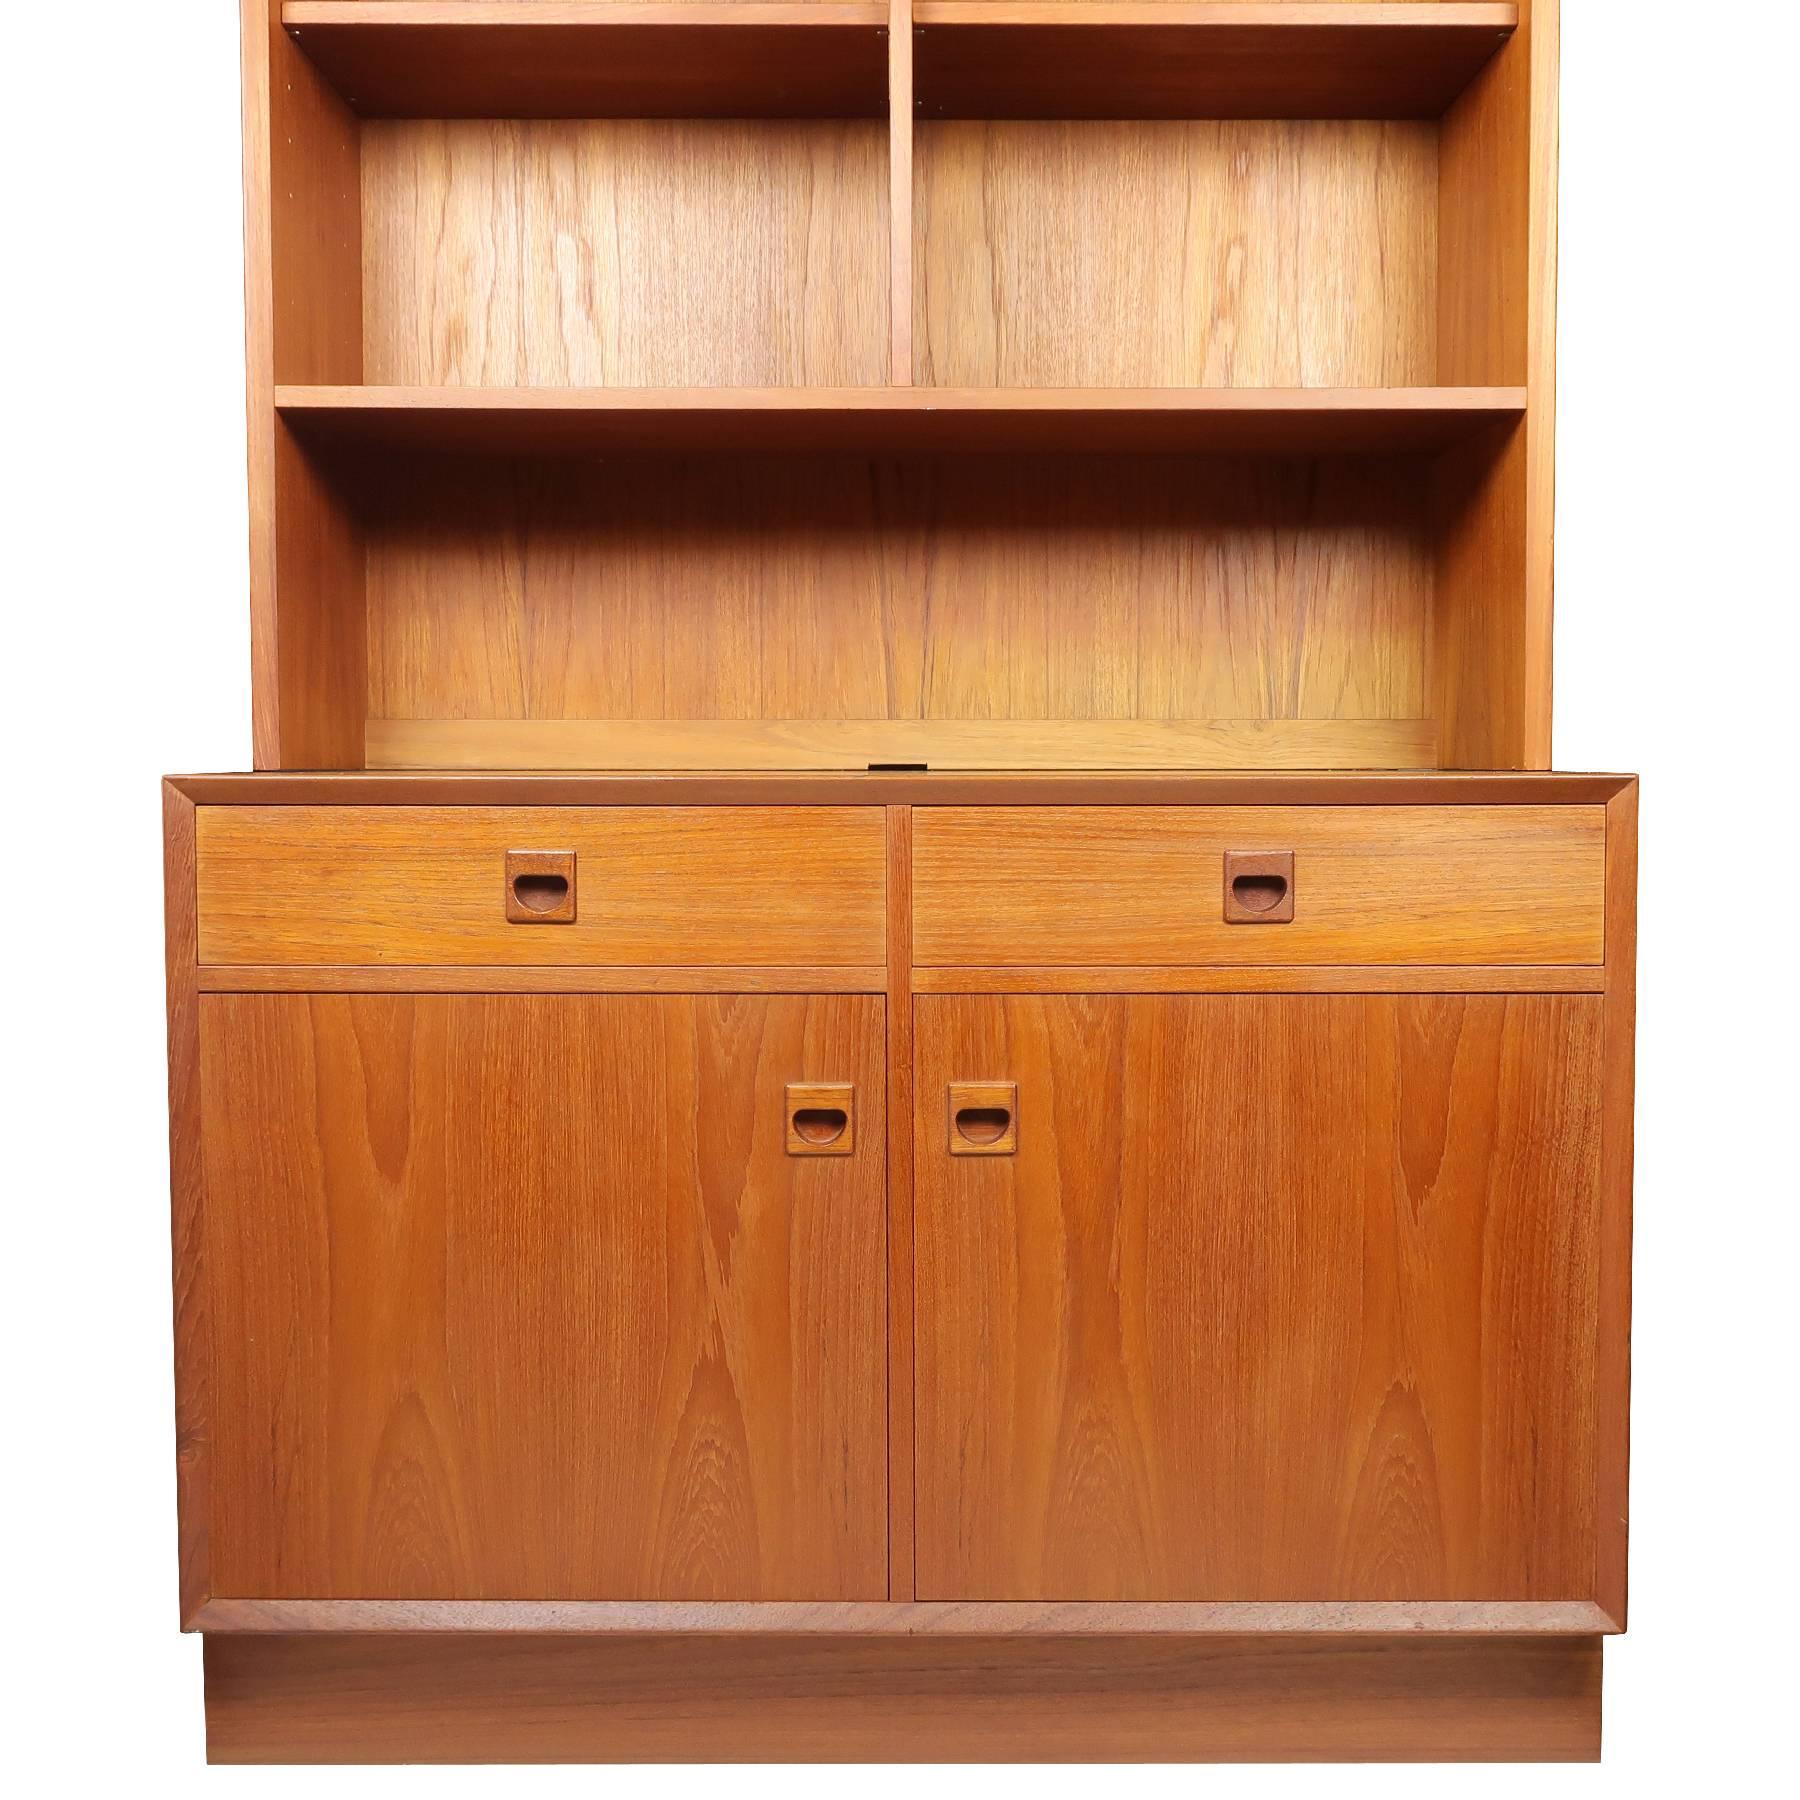 A strikingly lovely teak wall unit designed by Erik Brouer for Brouer Mobelfabrik (Denmark). Rich, warm colored wood with beautiful grain. Features adjustable shelving, two drawers with dovetail joinery, two brass hinged credenza doors, solid teak